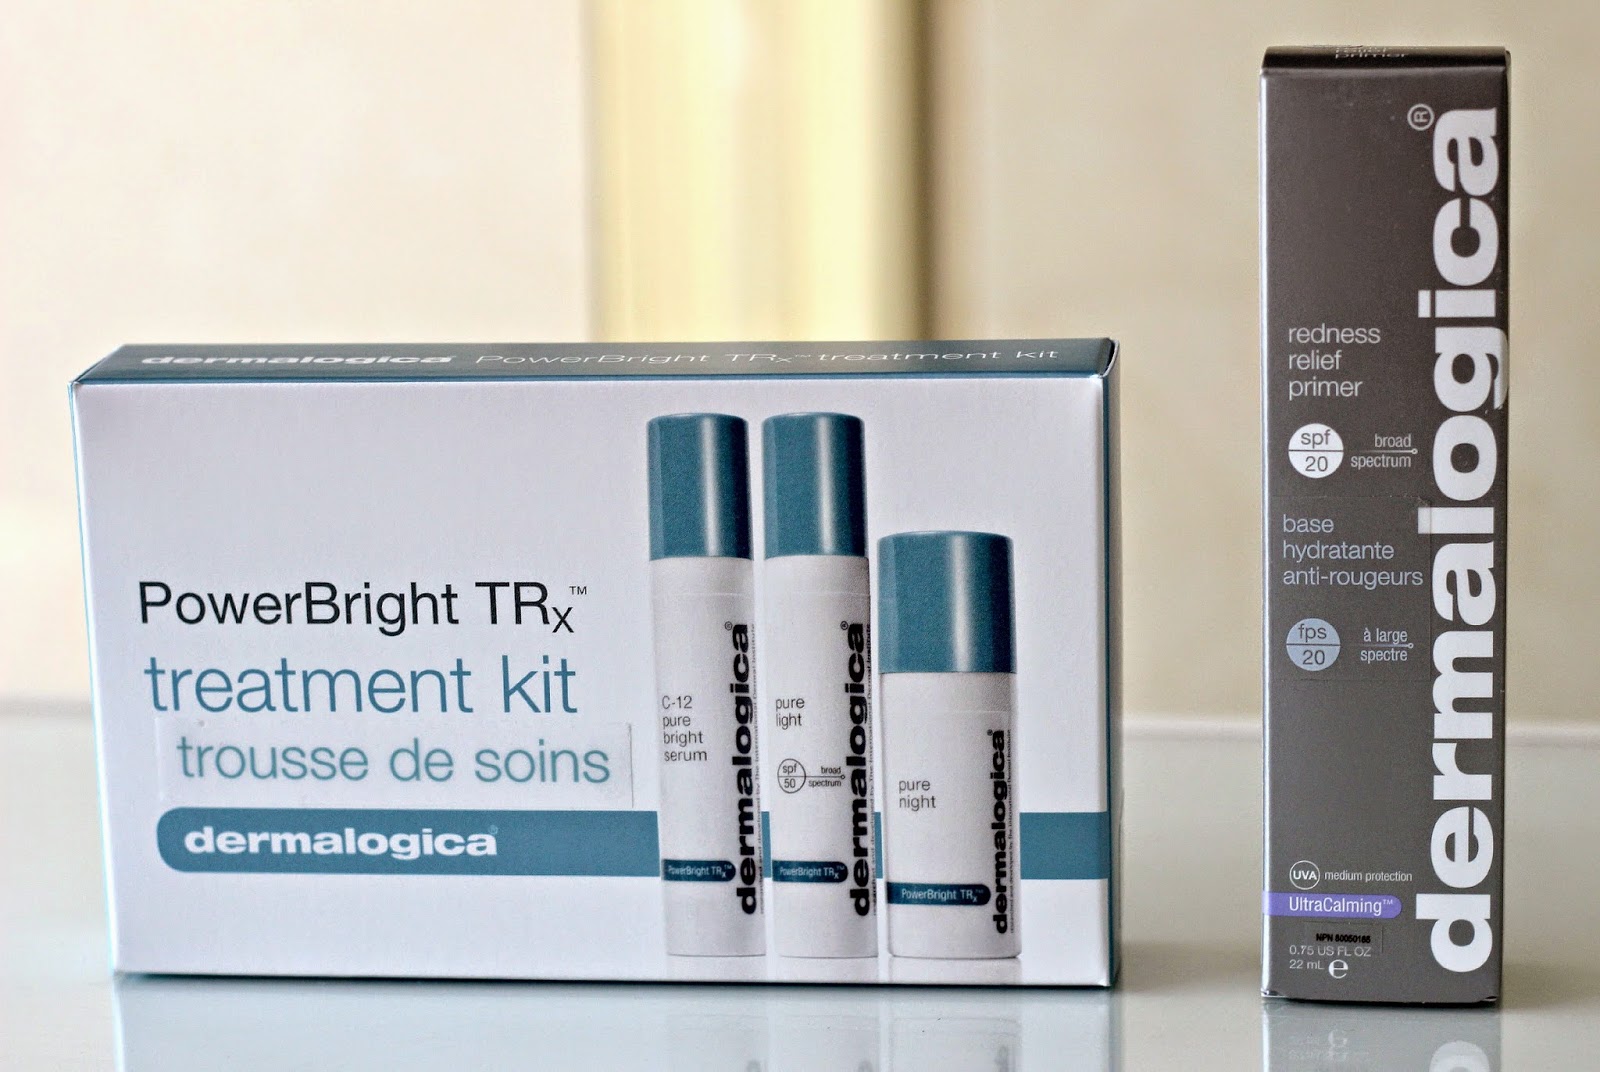 NEW Dermalogica PowerBright TRx Treatment Kit and Redness Relief Primer | Launch Event Review | Natalie Beauty